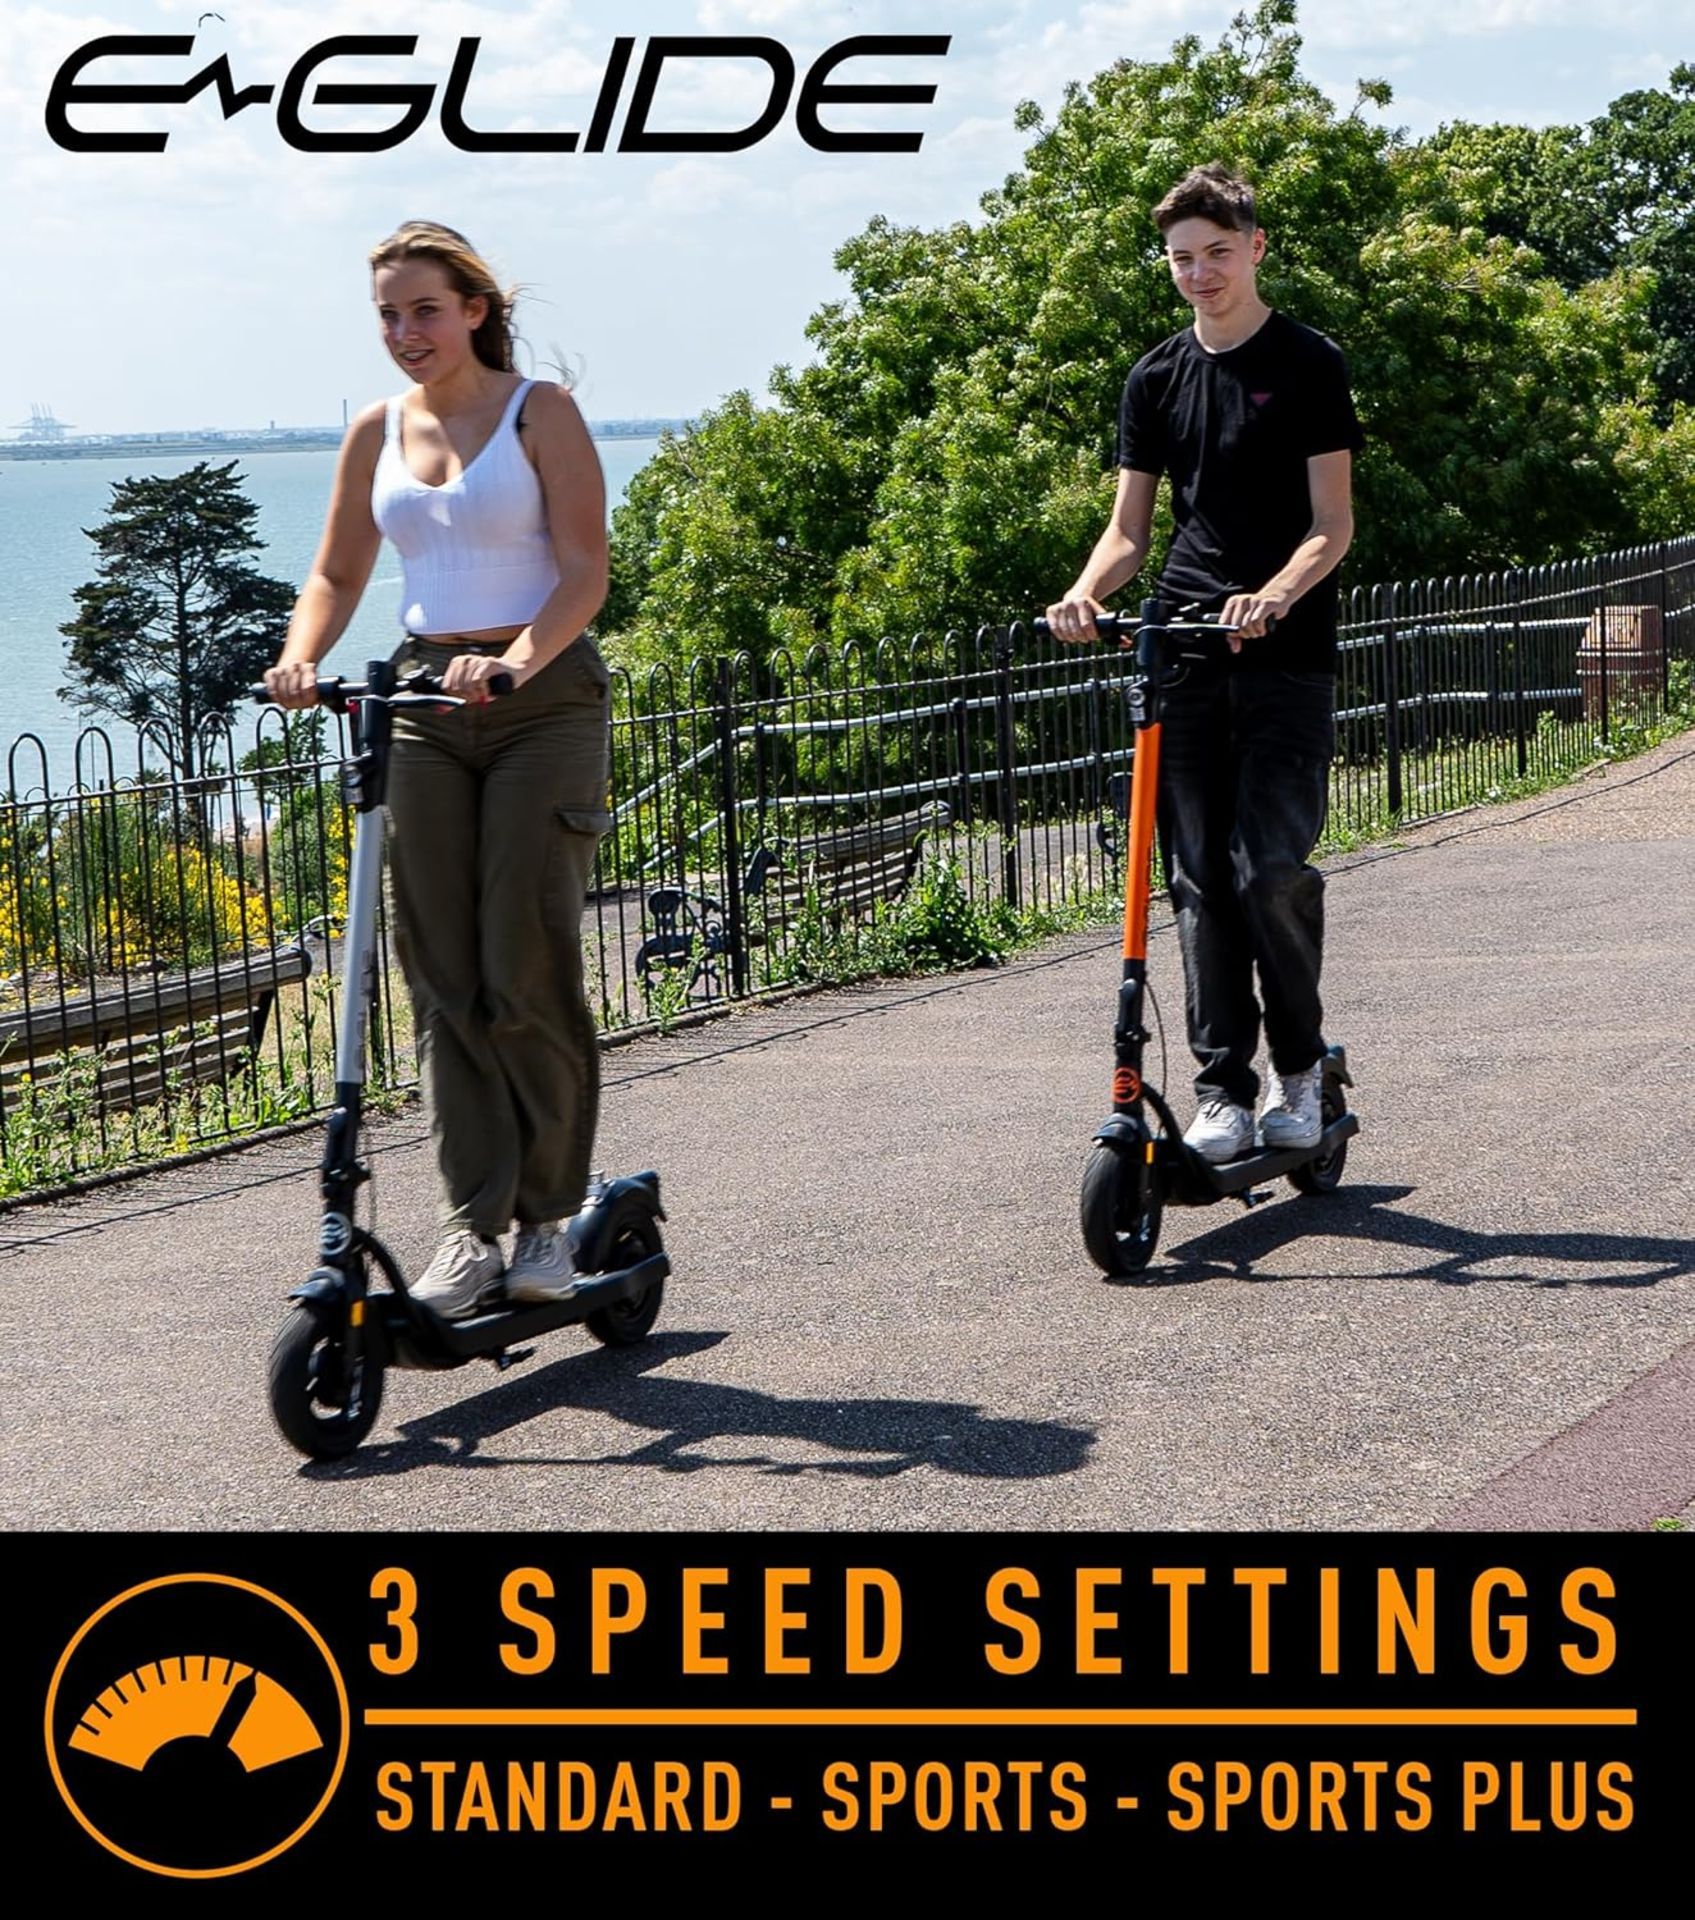 Brand New E-Glide V2 Electric Scooter Orange and Black RRP £599, Introducing a sleek and efficient - Image 4 of 5